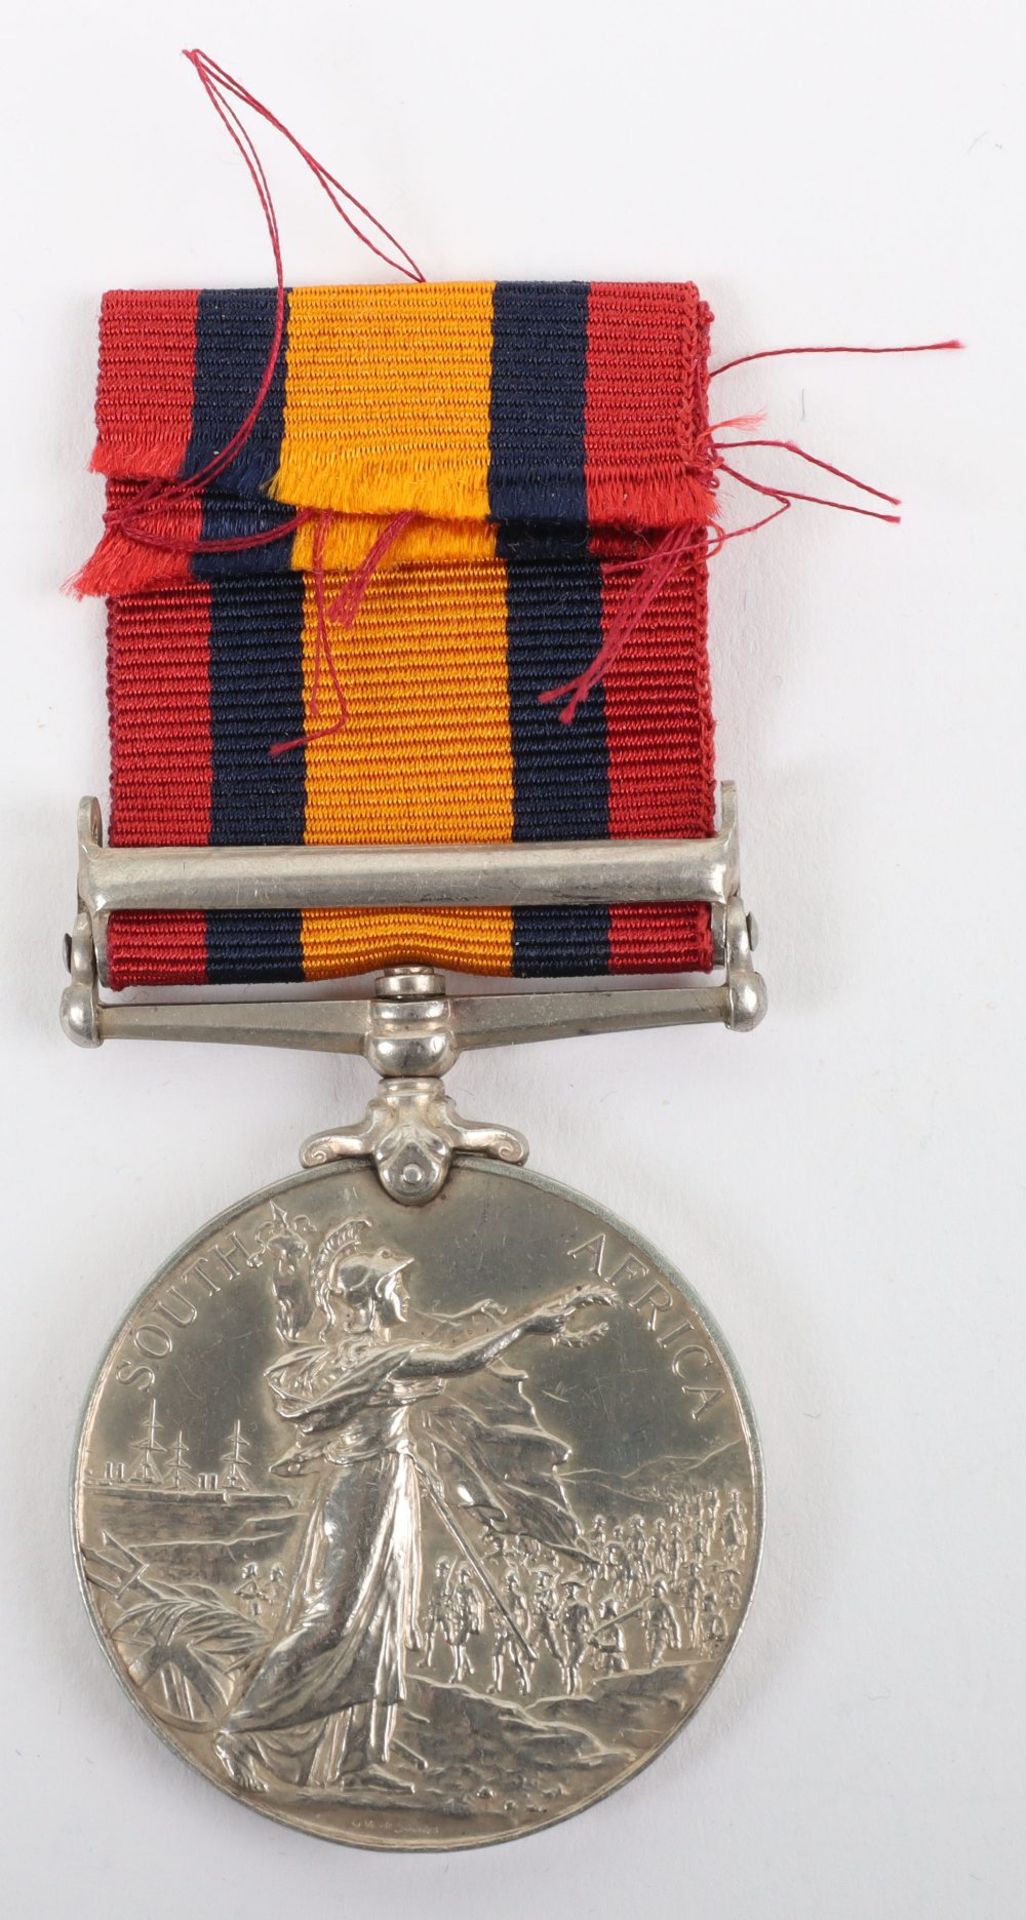 Queens South Africa Medal Awarded to a Gaoler in the Natal Police - Image 2 of 4